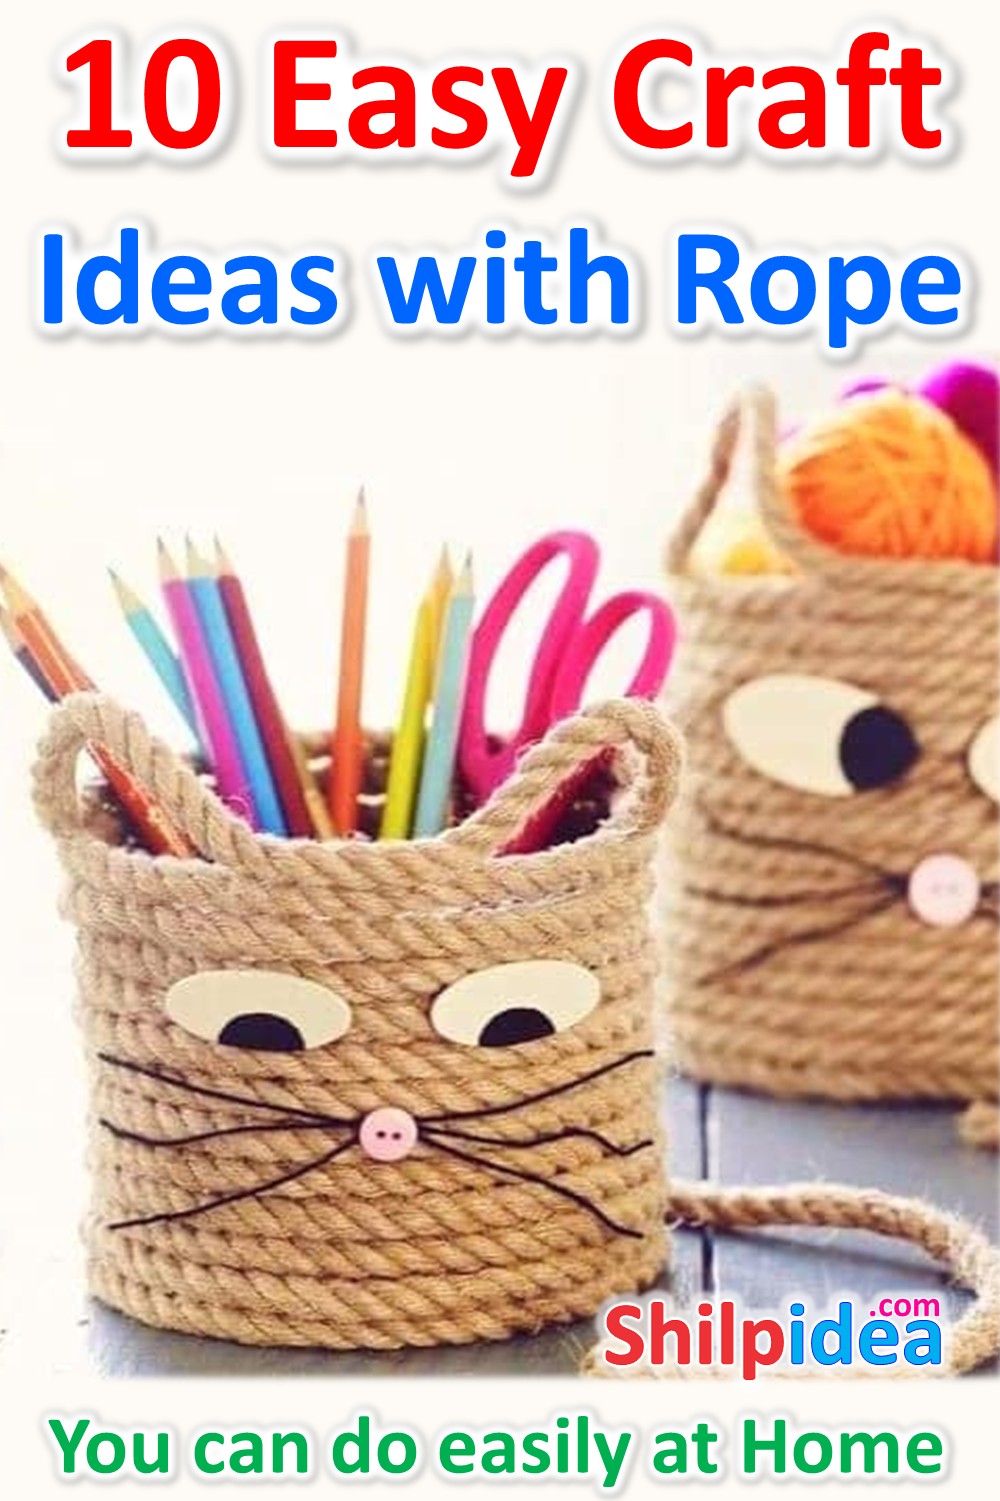 easy-craft-ideas-with-rope-shilpidea-pin